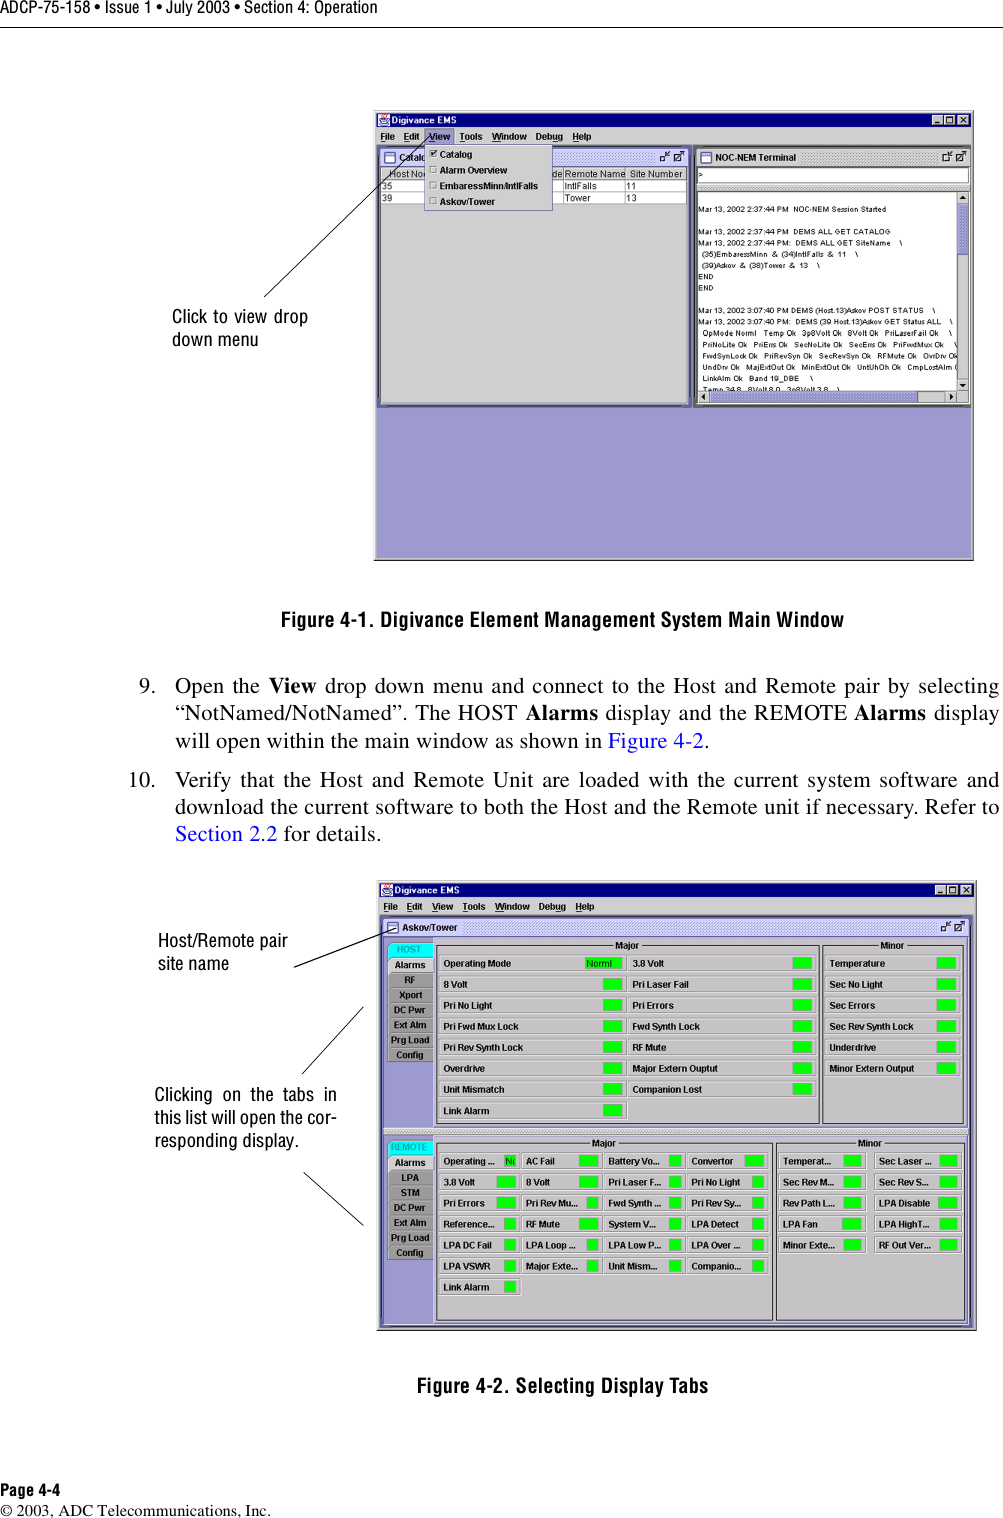 ADCP-75-158 • Issue 1 • July 2003 • Section 4: OperationPage 4-4© 2003, ADC Telecommunications, Inc.Figure 4-1. Digivance Element Management System Main Window9. Open the View drop down menu and connect to the Host and Remote pair by selecting“NotNamed/NotNamed”. The HOST Alarms display and the REMOTE Alarms displaywill open within the main window as shown in Figure 4-2. 10. Verify that the Host and Remote Unit are loaded with the current system software anddownload the current software to both the Host and the Remote unit if necessary. Refer toSection 2.2 for details. Figure 4-2. Selecting Display TabsClick to view dropdown menuClicking on the tabs inthis list will open the cor-responding display.Host/Remote pairsite name